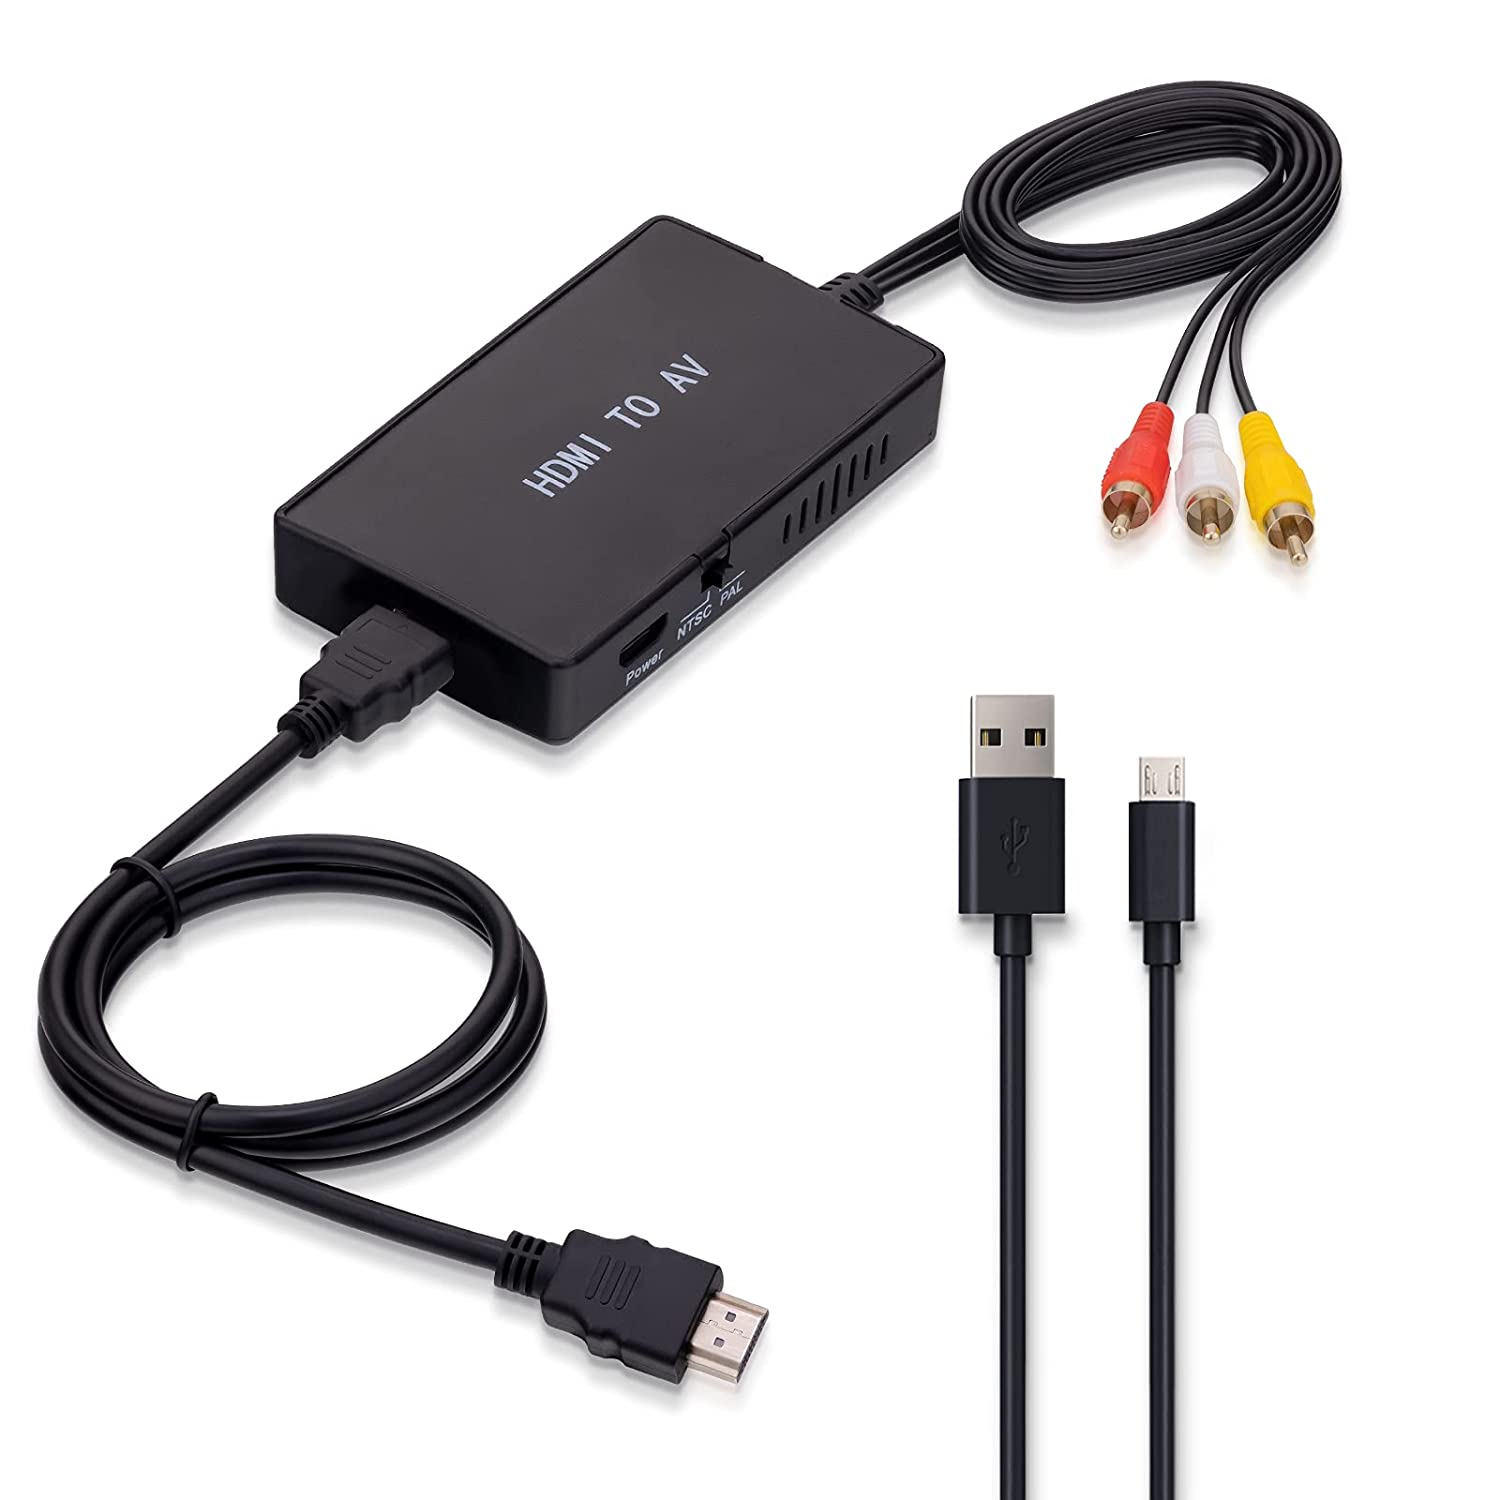 HDMI to RCA Cable, HDMI to RCA Converter Adapter Cable, 1080P HDMI to AV  3RCA CVBs Composite Video Audio Supports for  Fire Stick, Roku